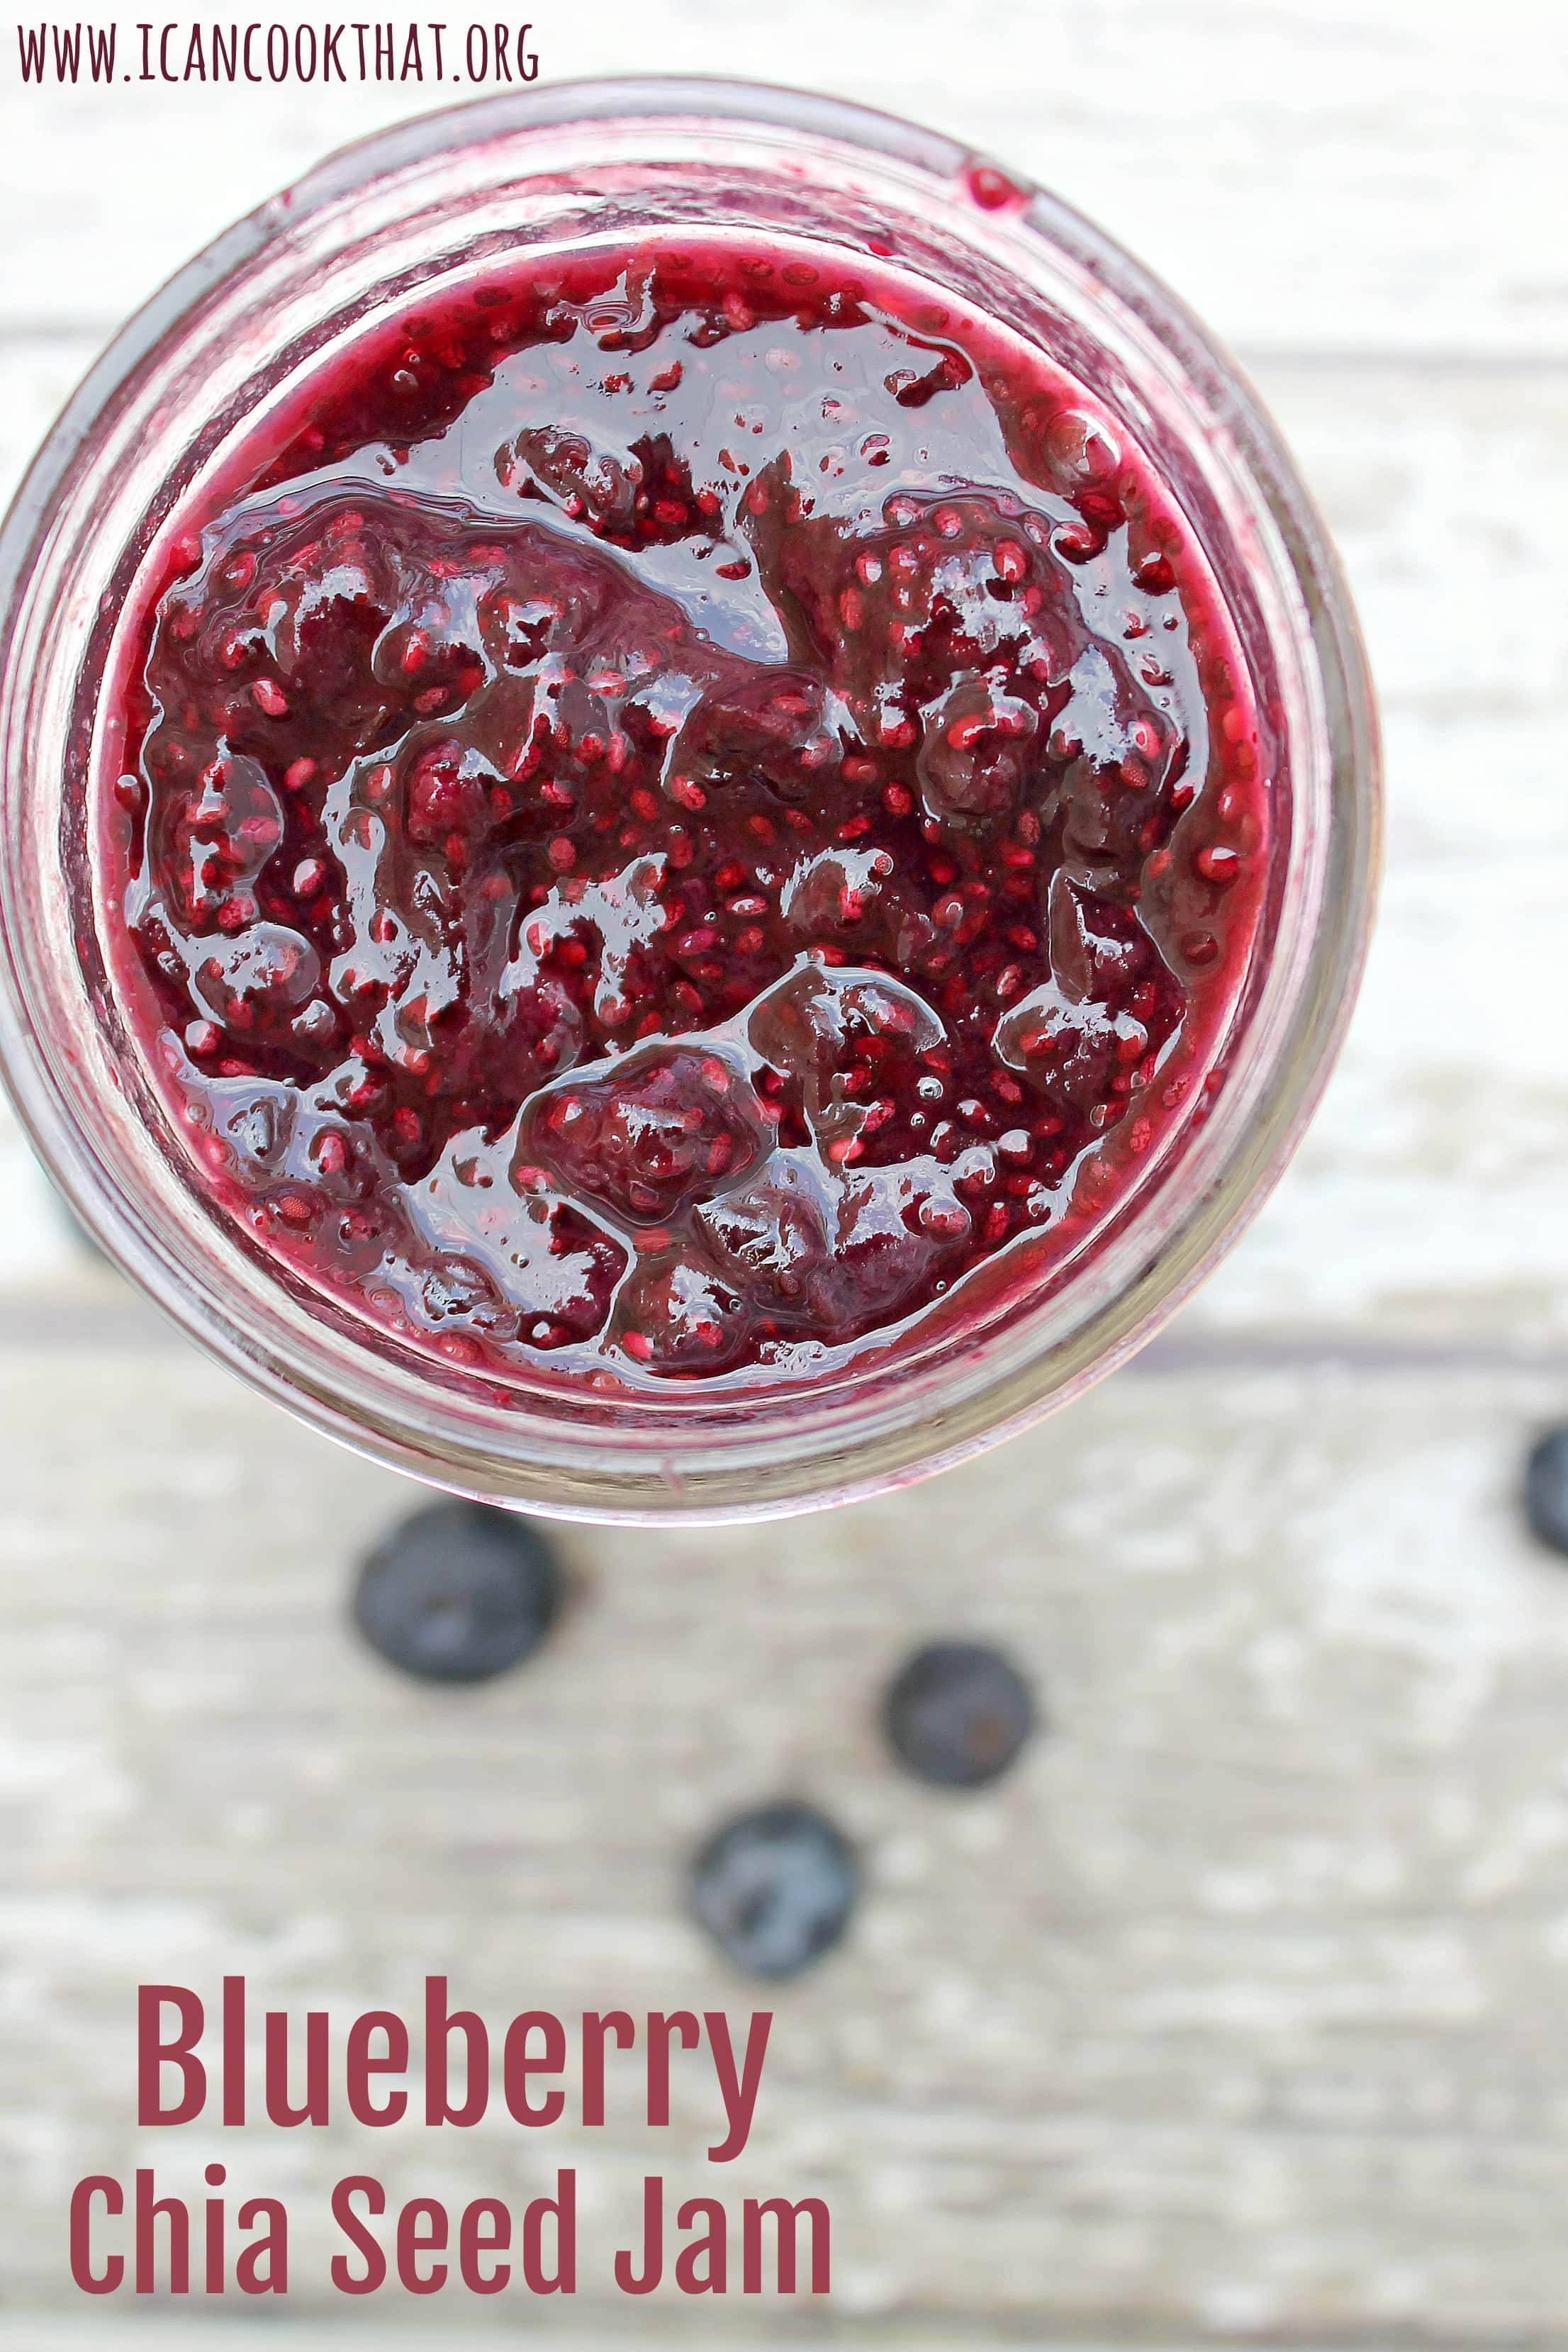 Blueberry Chia Seed Jam Recipe | I Can Cook That